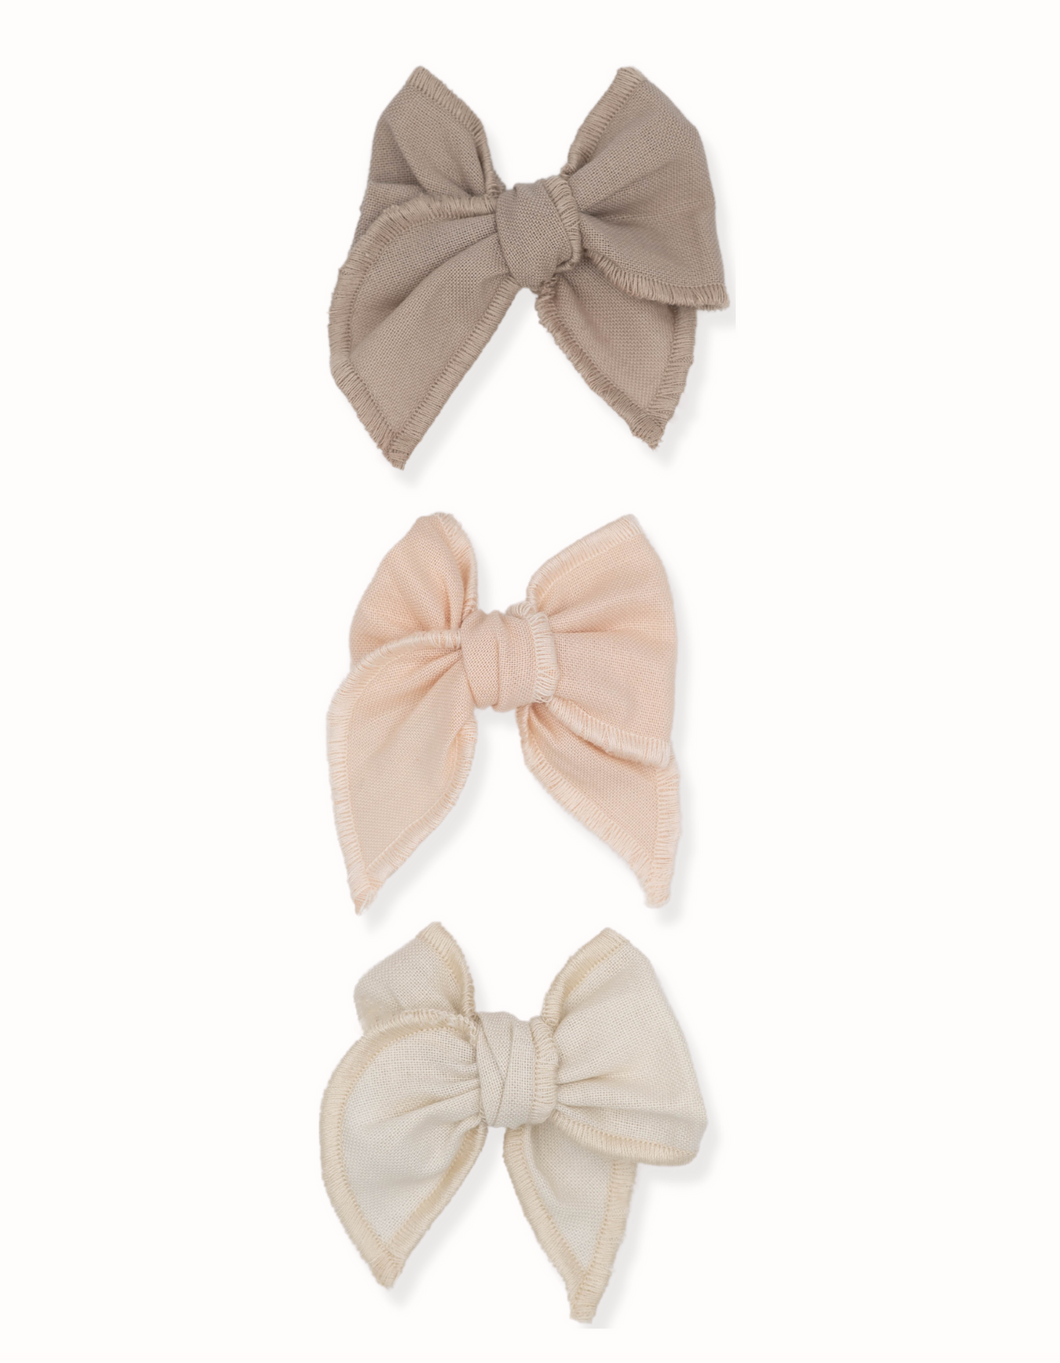 Livy Lou Collection Neutral Solids Mini Fable Clips